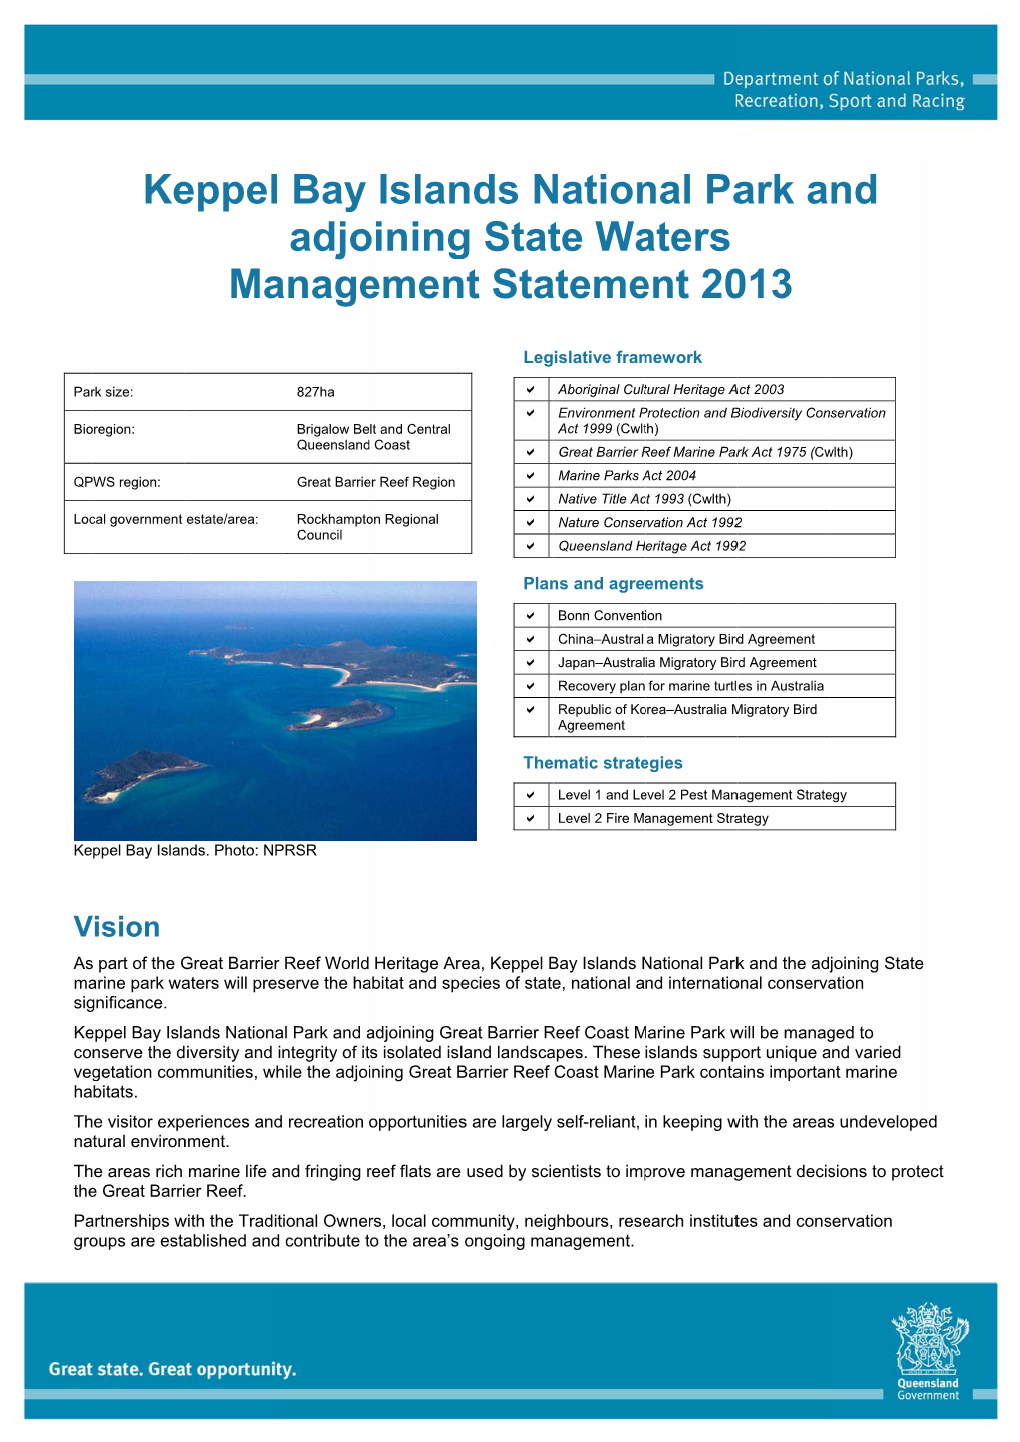 Keppel Bay Islands National Park and Adjoining State Waters Management Statement 2013